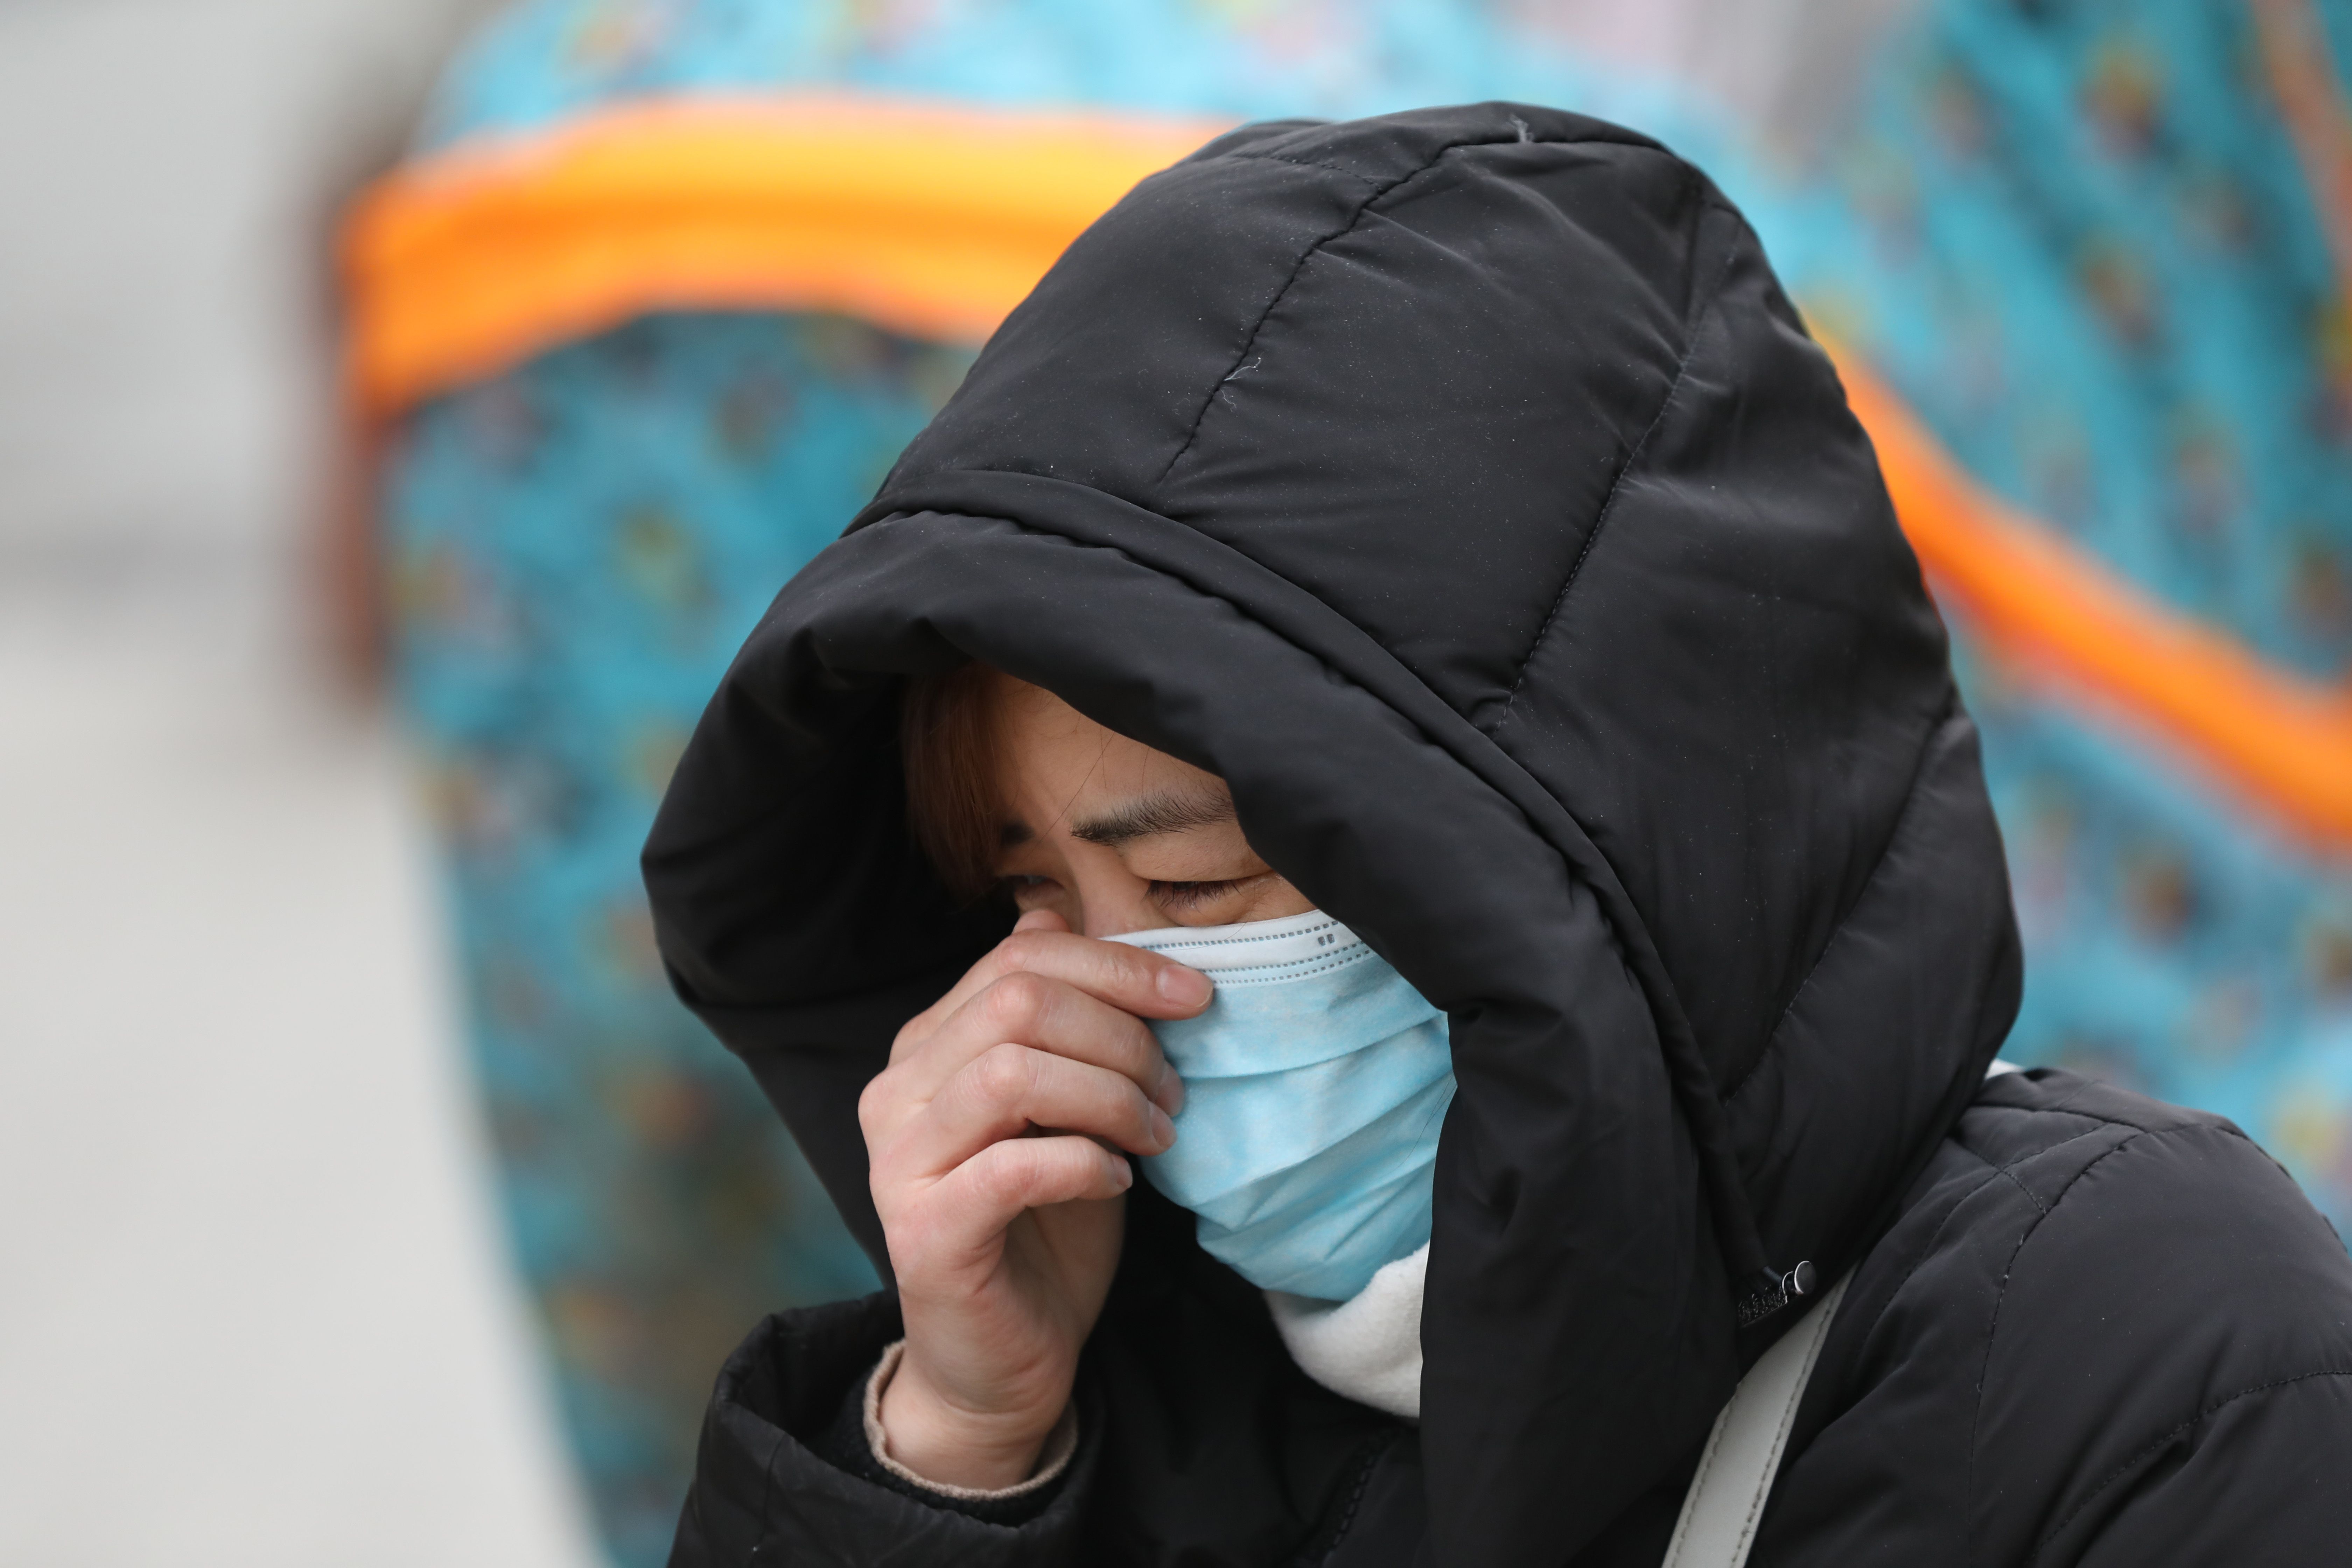 A woman cries at the vigil, wearing a coat and a protective face mask